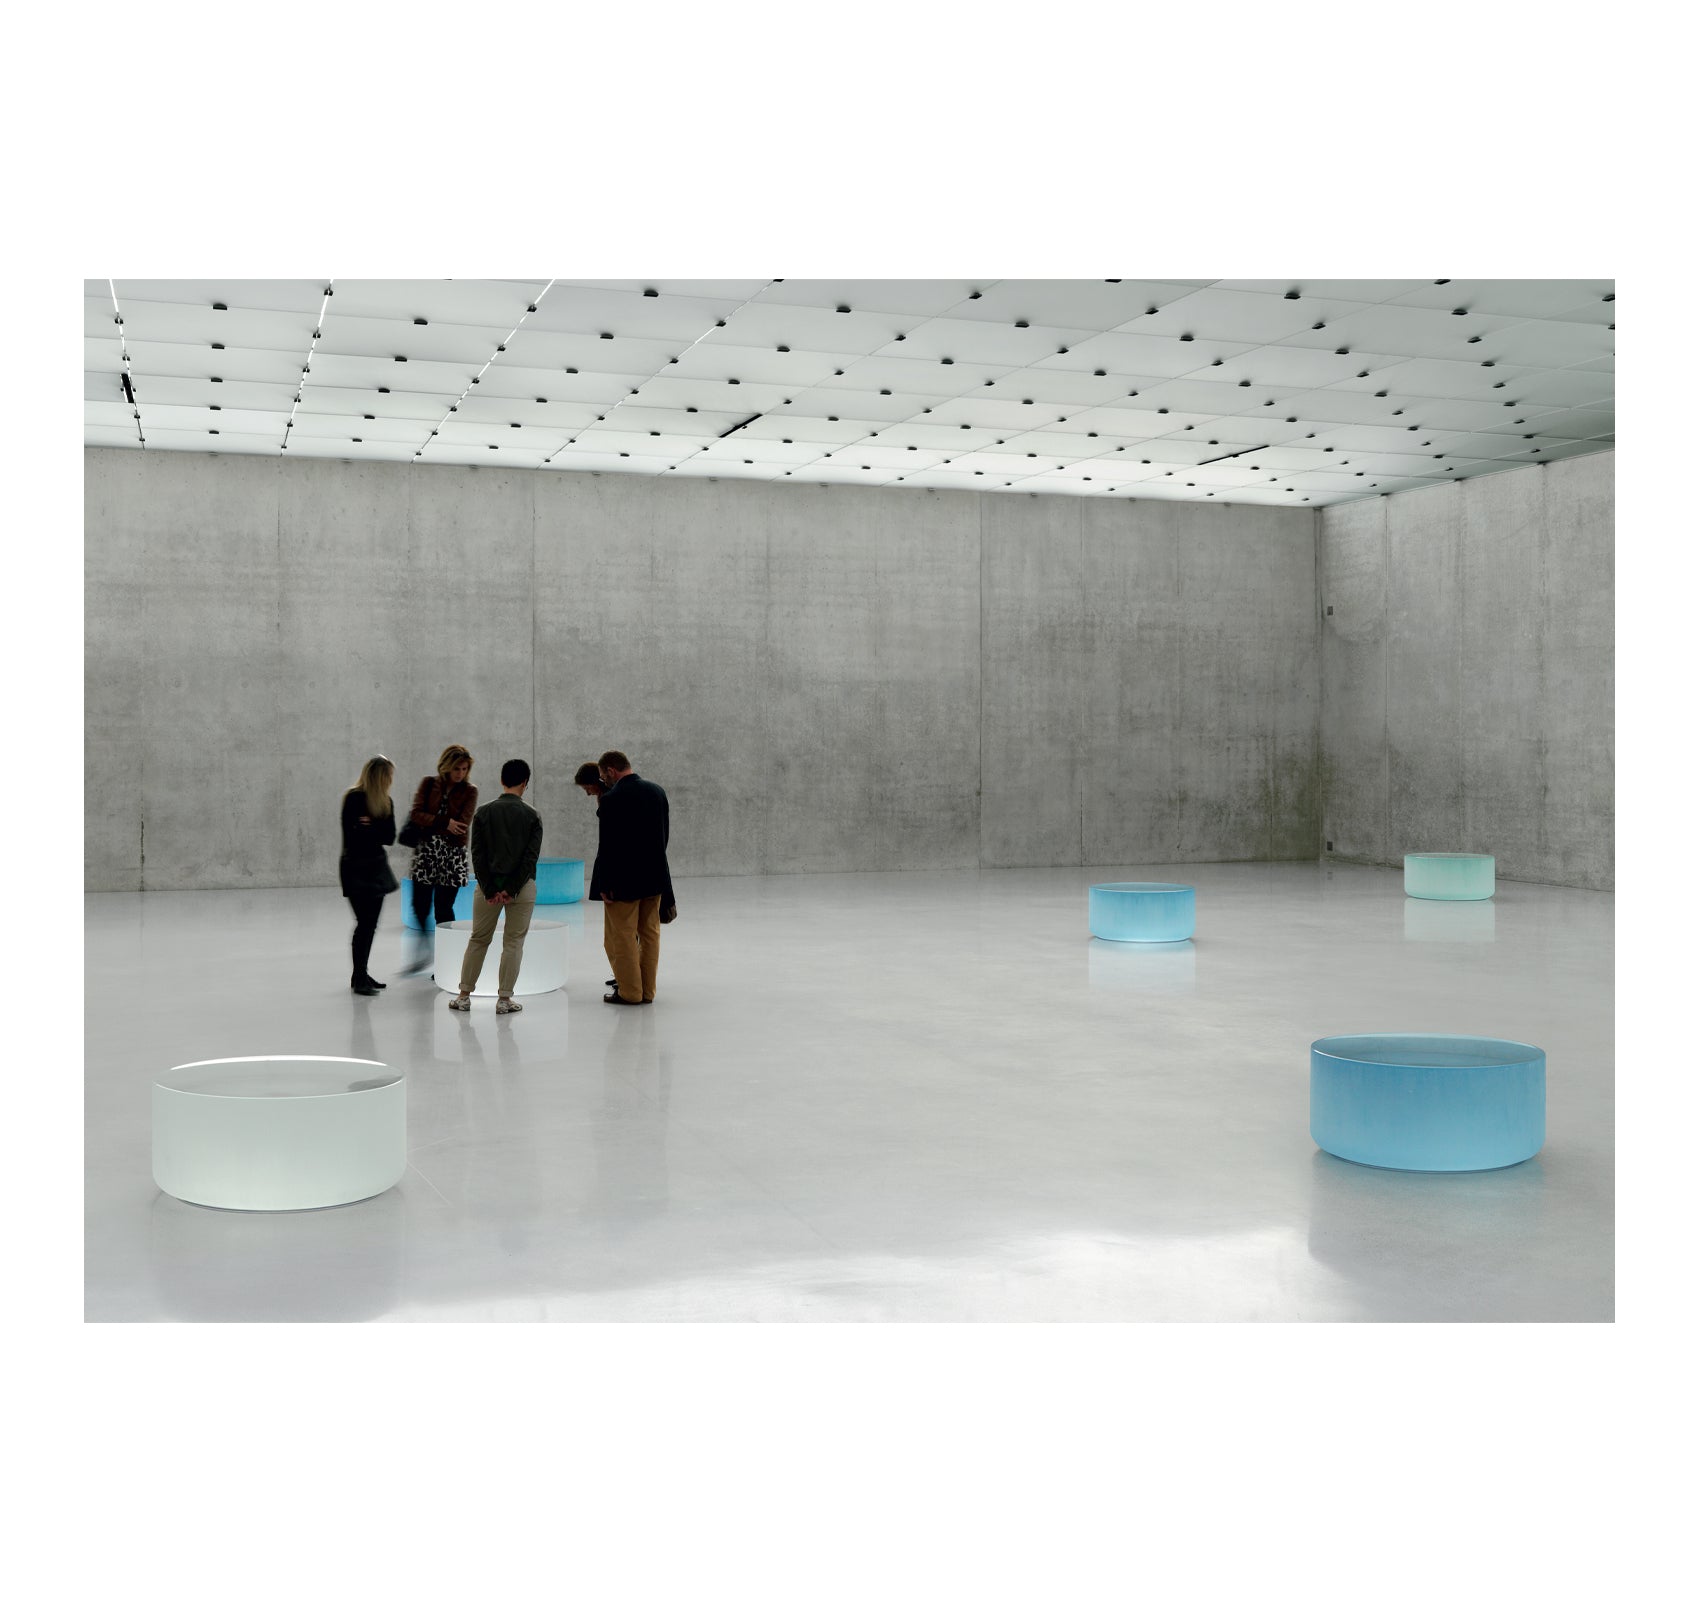 RONI HORN: WHEN YOU SEE YOUR REFLECTION IN WATER, DO YOU RECOGNIZE THE WATER IN YOU? by Roni Horn